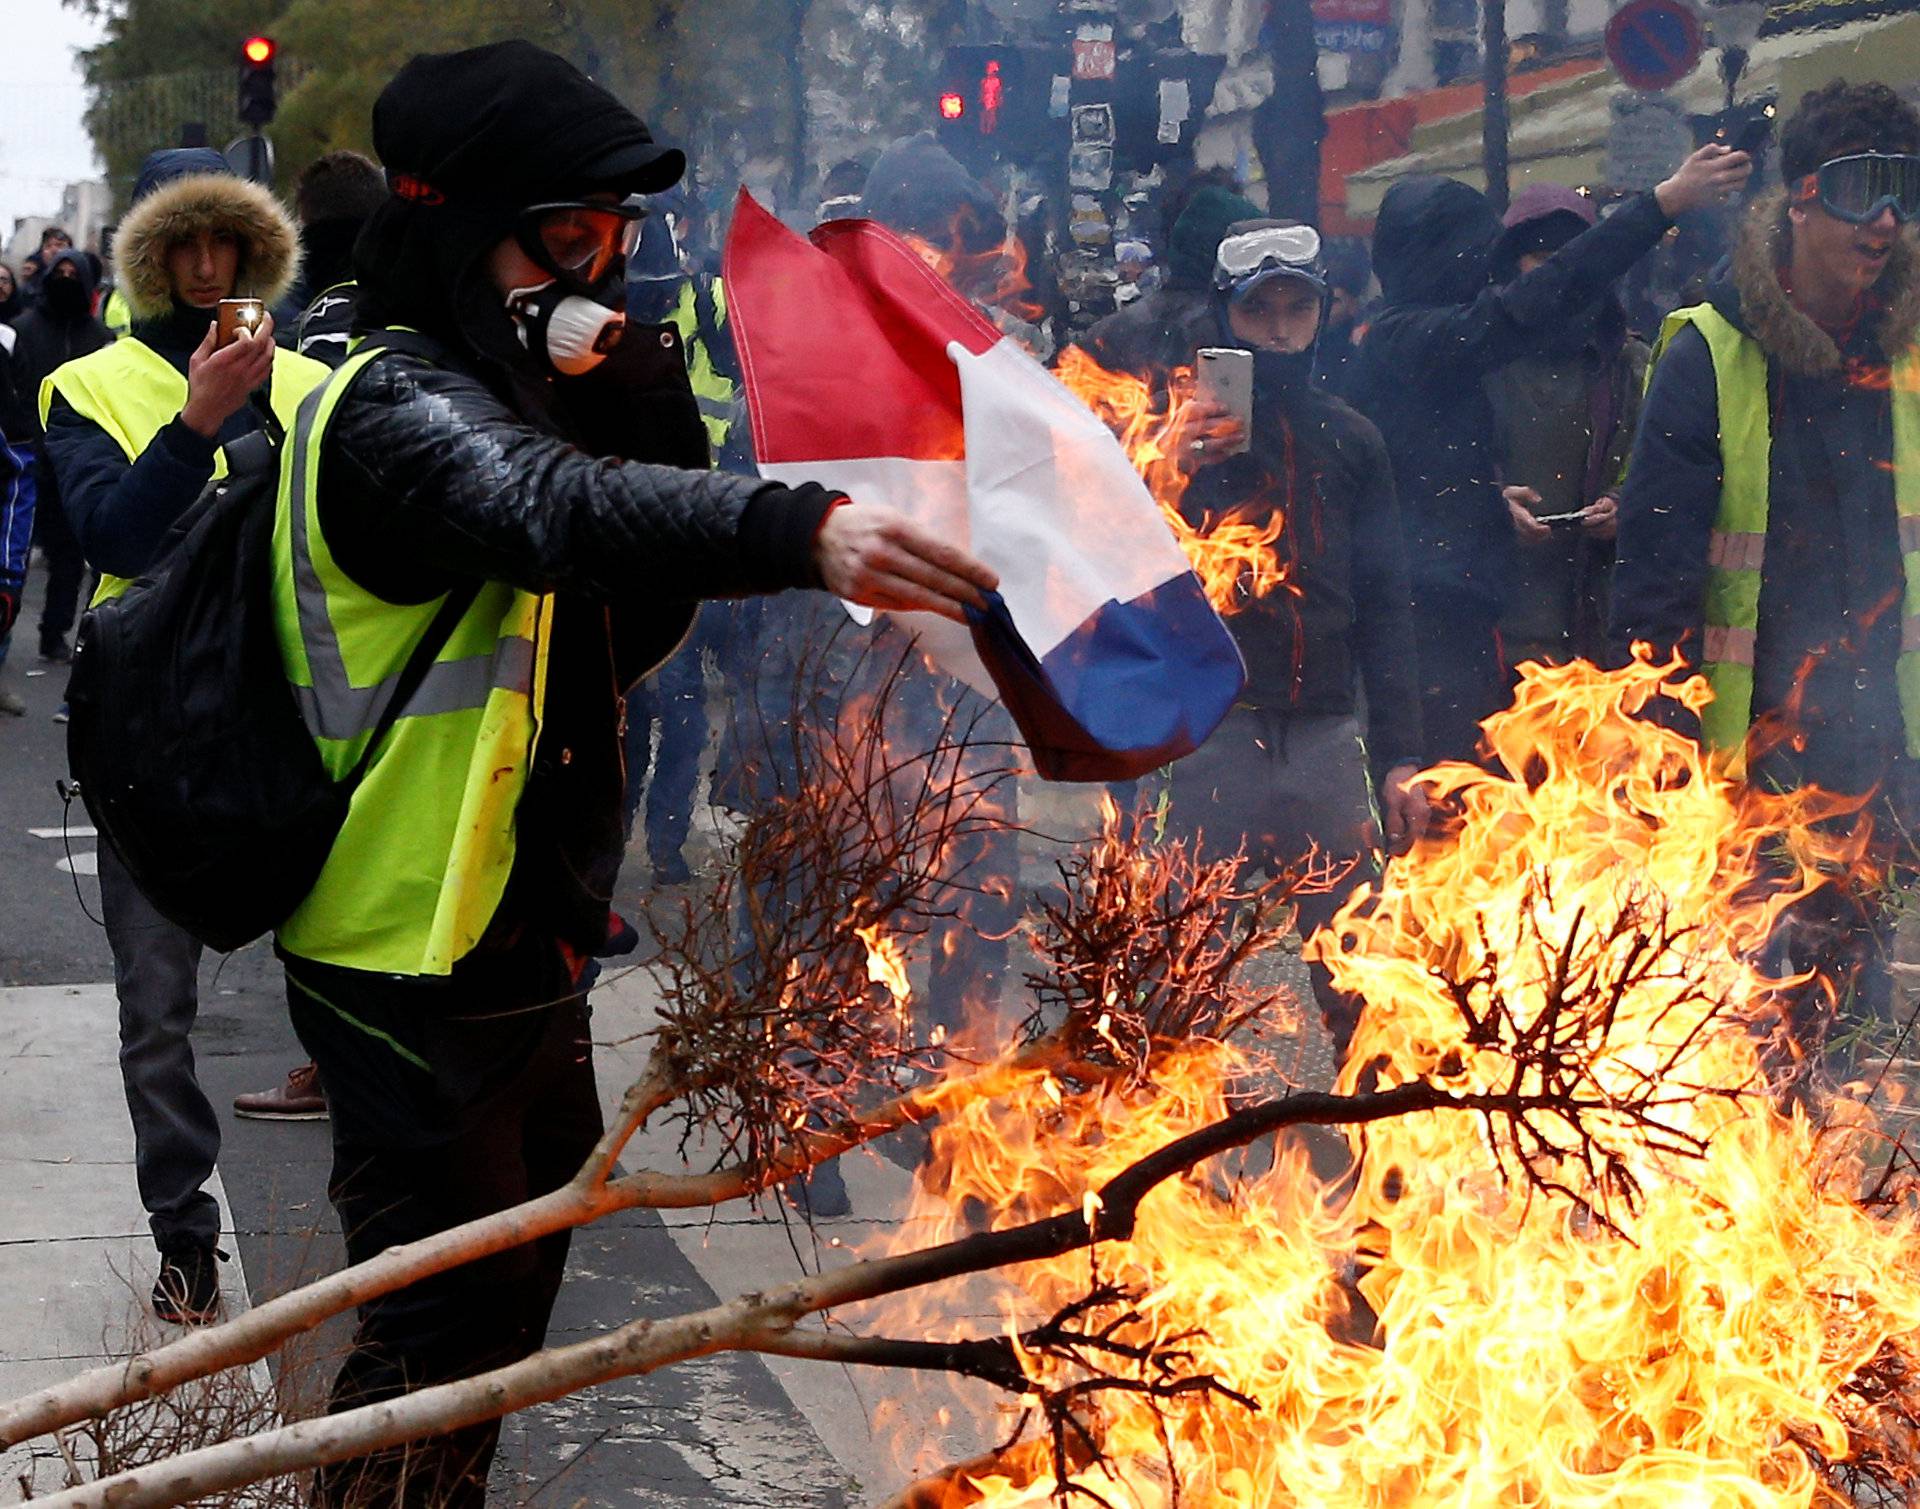 A protester wearing a yellow vest burns a French flag at a barricade during clashes with police as part of a national day of protest by the "yellow vests" movement in Paris